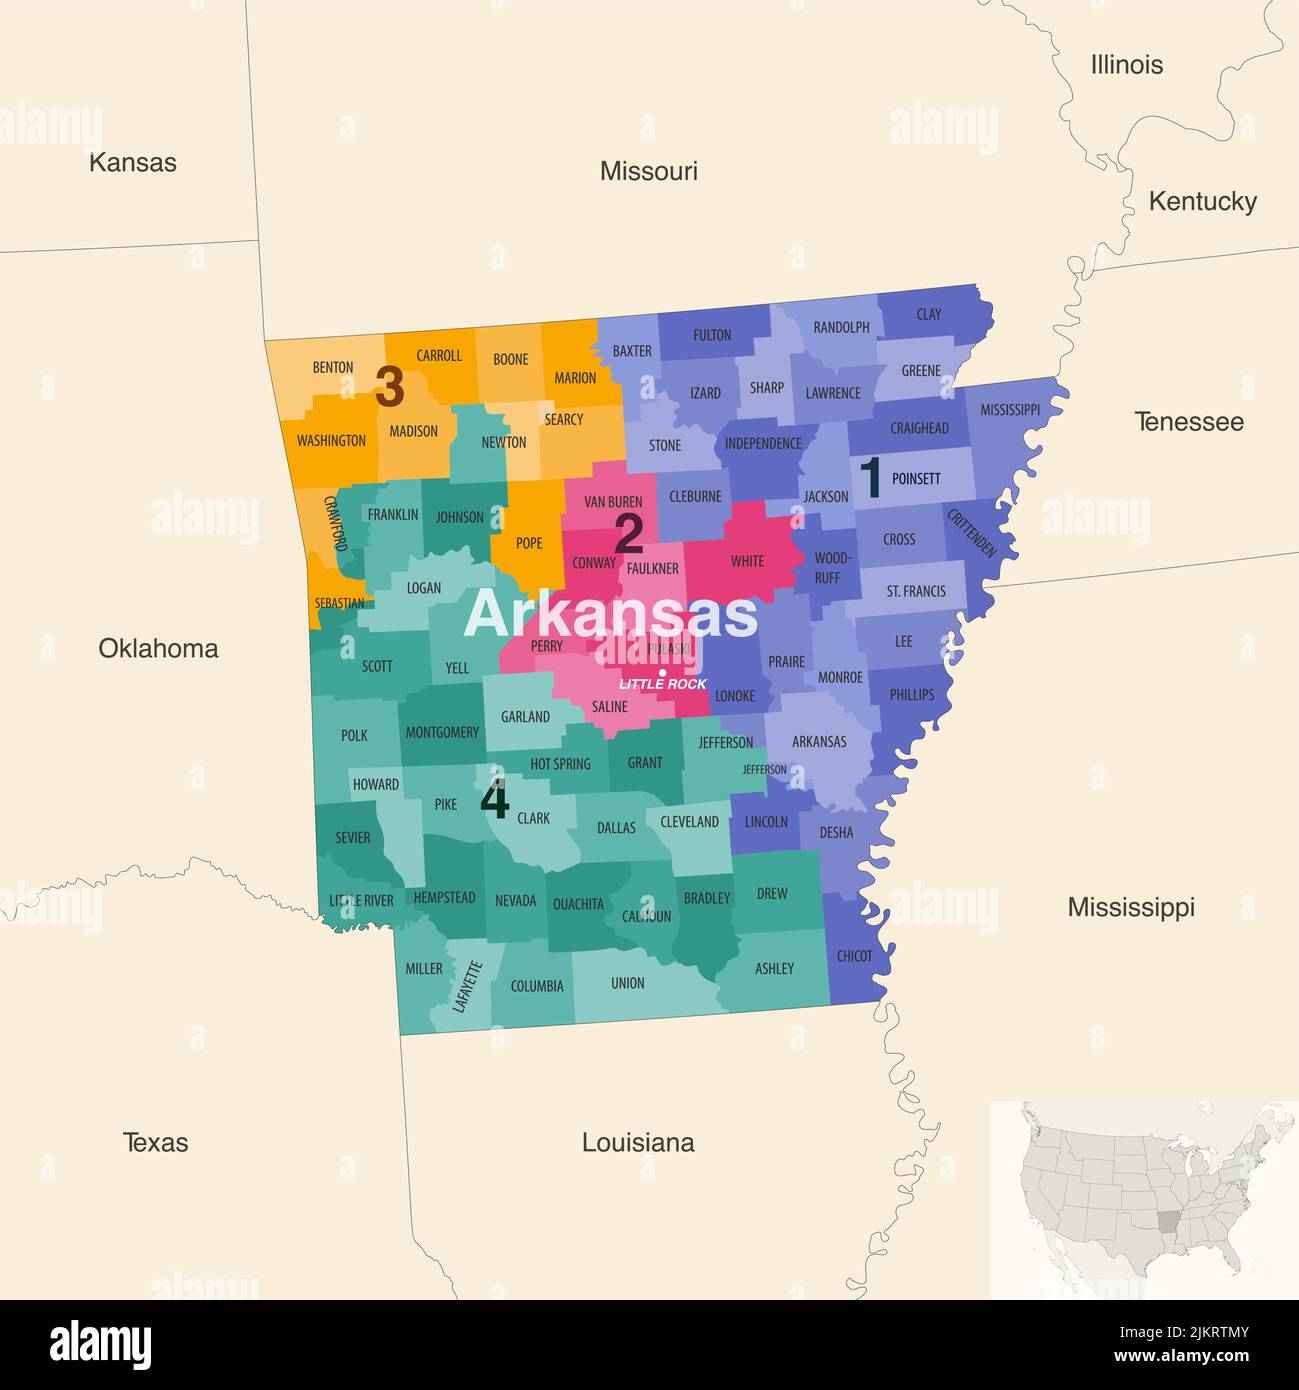 Arkansas State Counties Colored By Congressional Districts Vector Map With Neighbouring States 6009